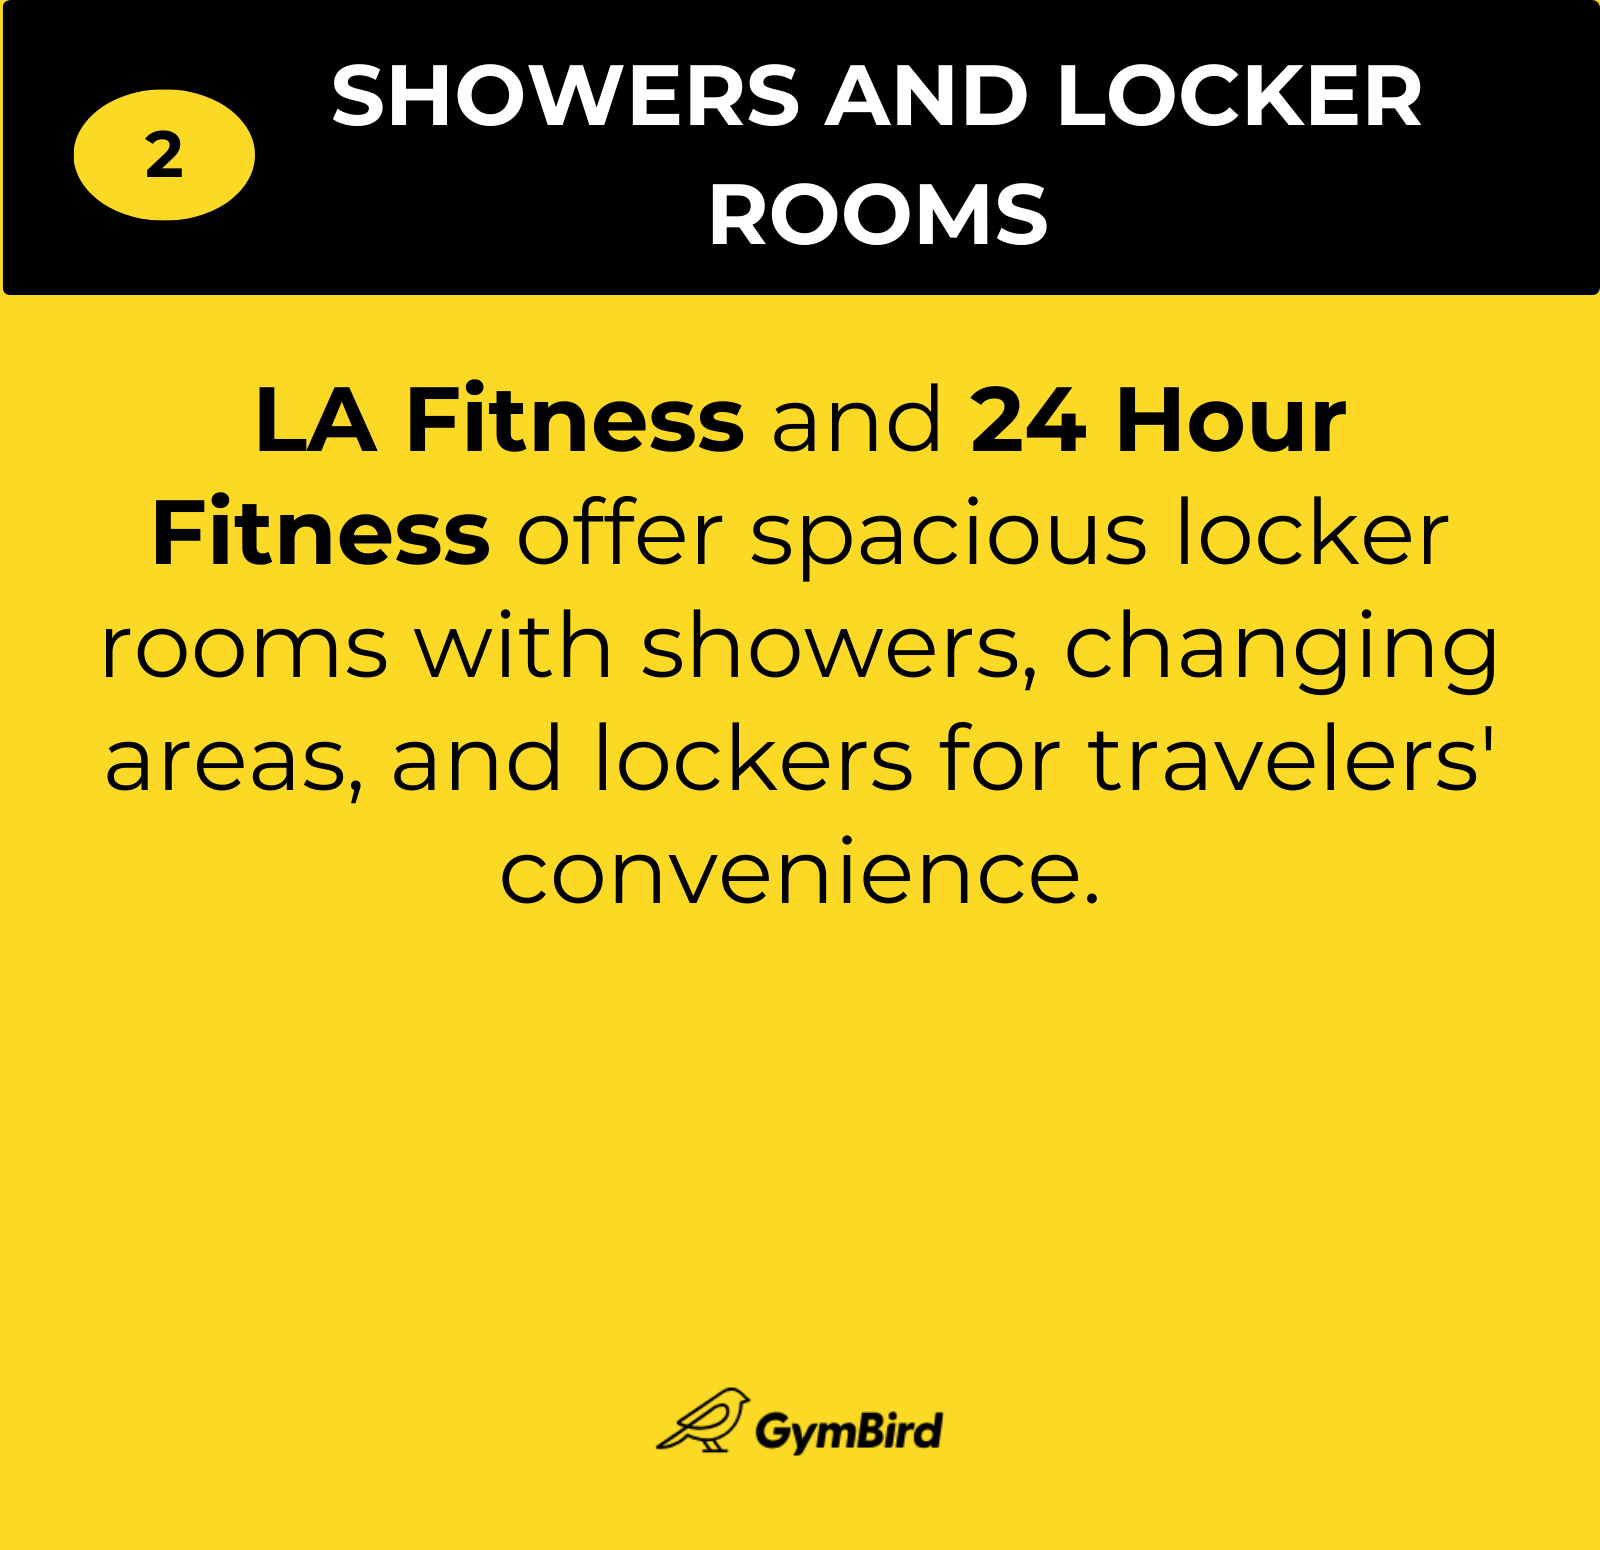 how to choose a gym for travelers - shows and locker rooms